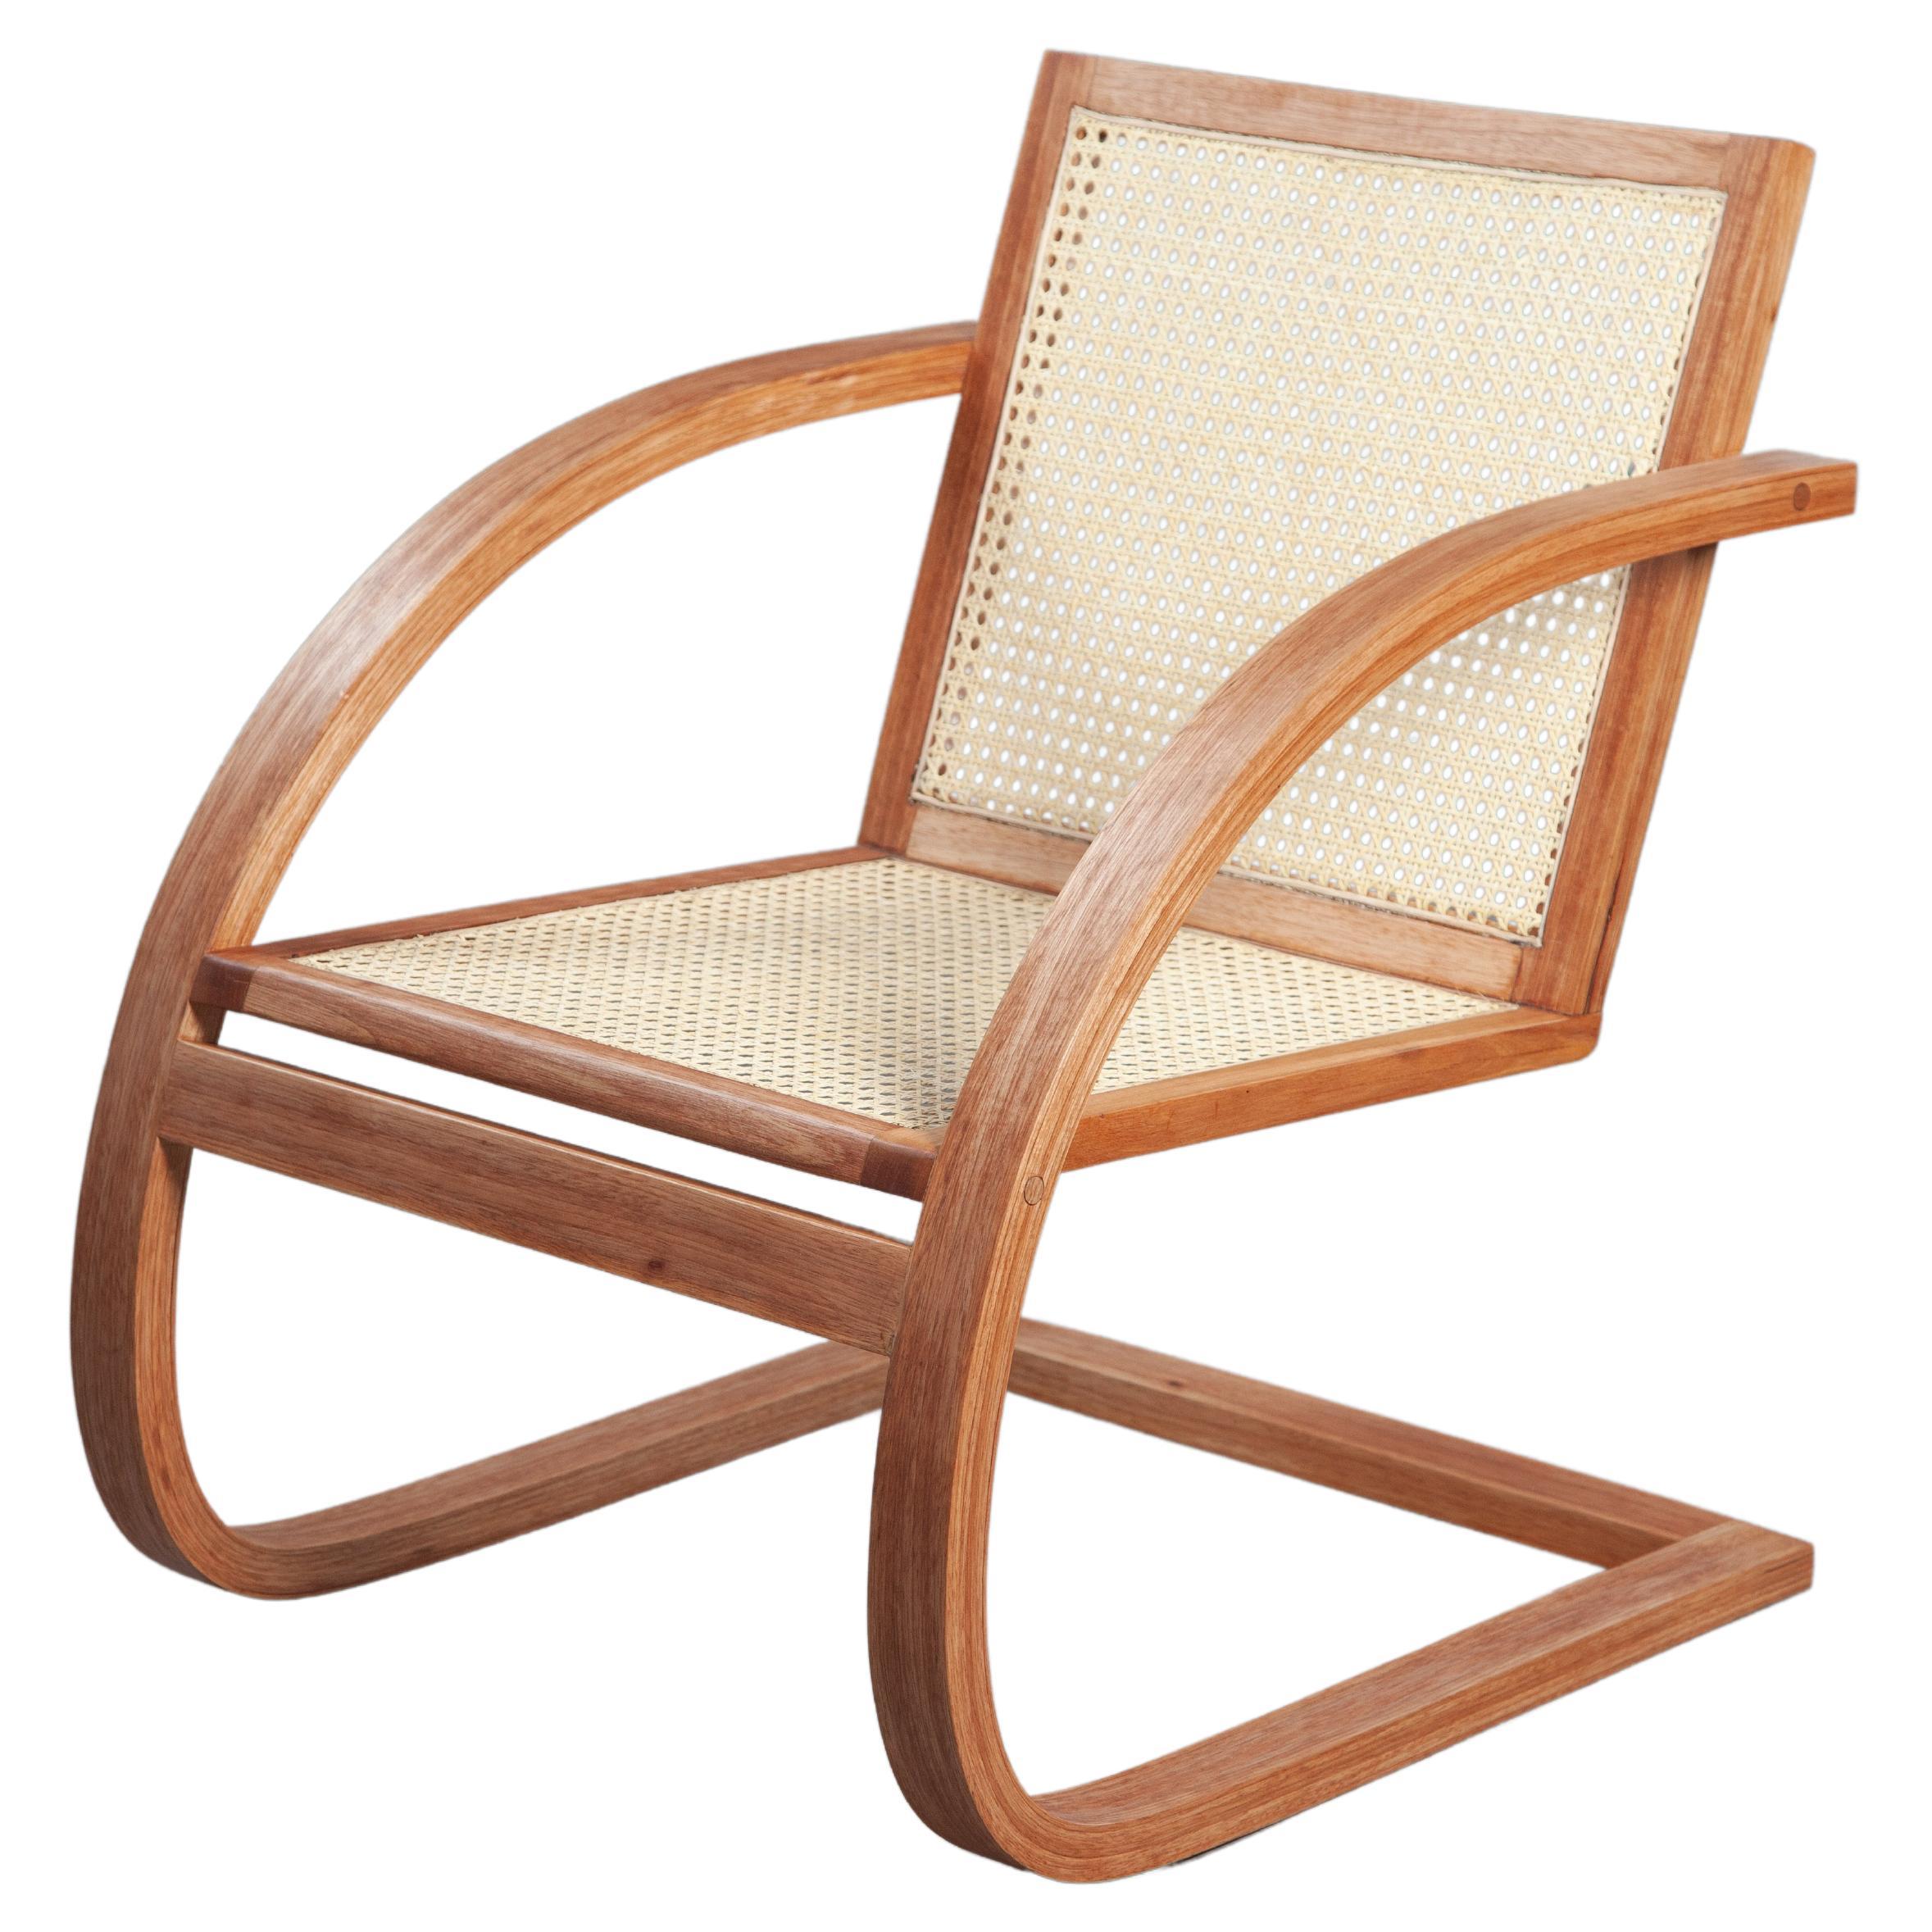 Mima Lounge Chair. Handcrafted from solid wood For Sale